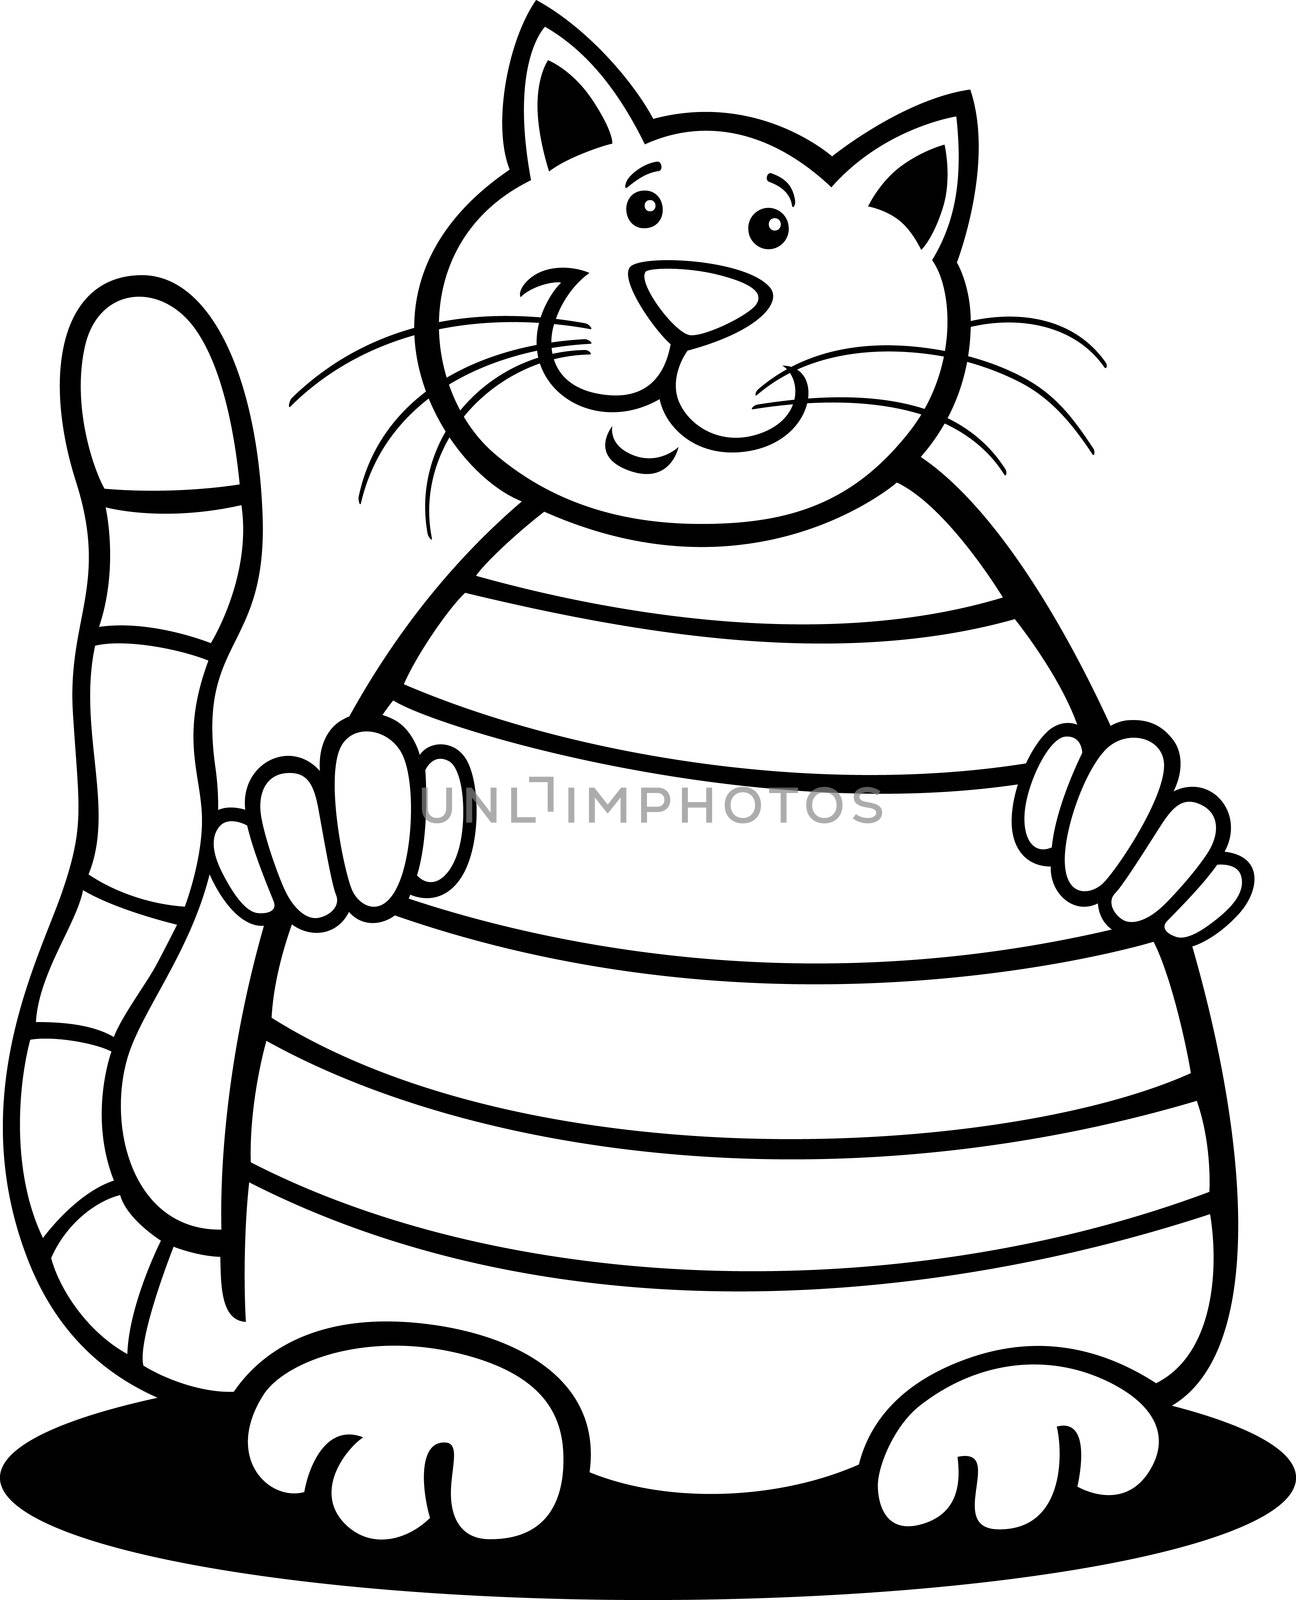 cartoon illustration of tabby cat for coloring book